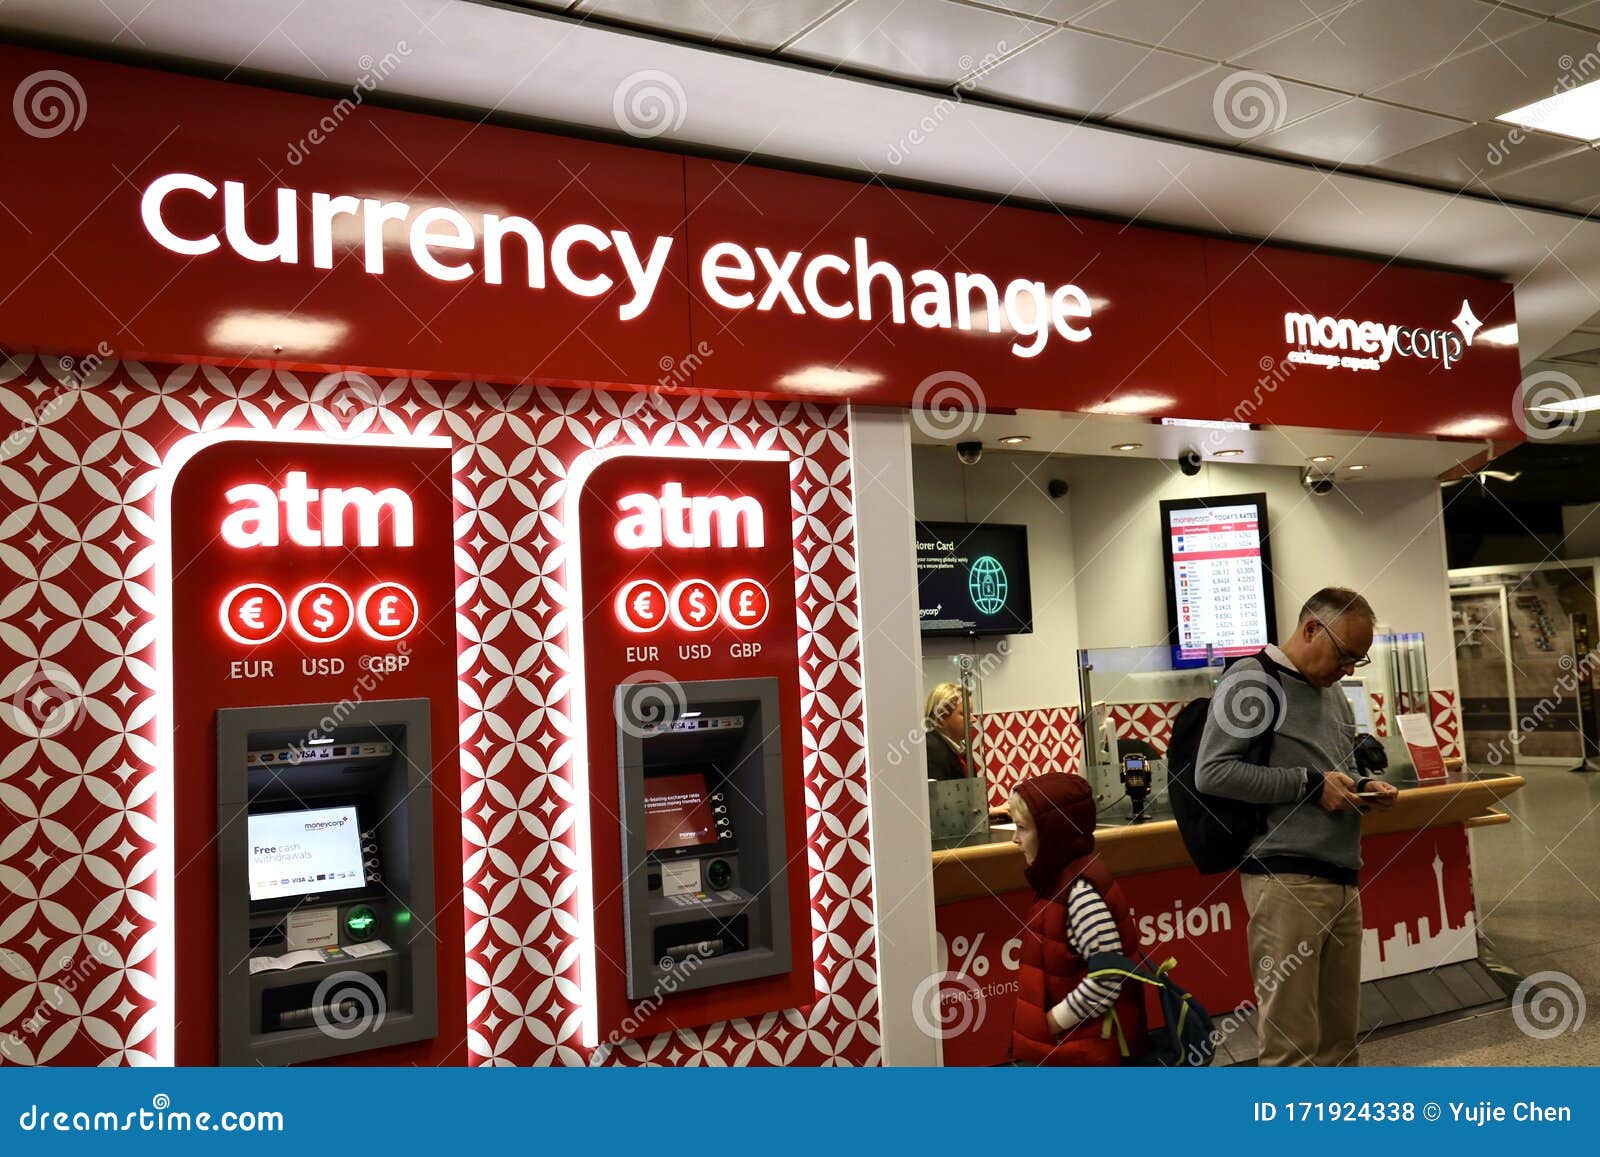 Currency exchange at delhi airport